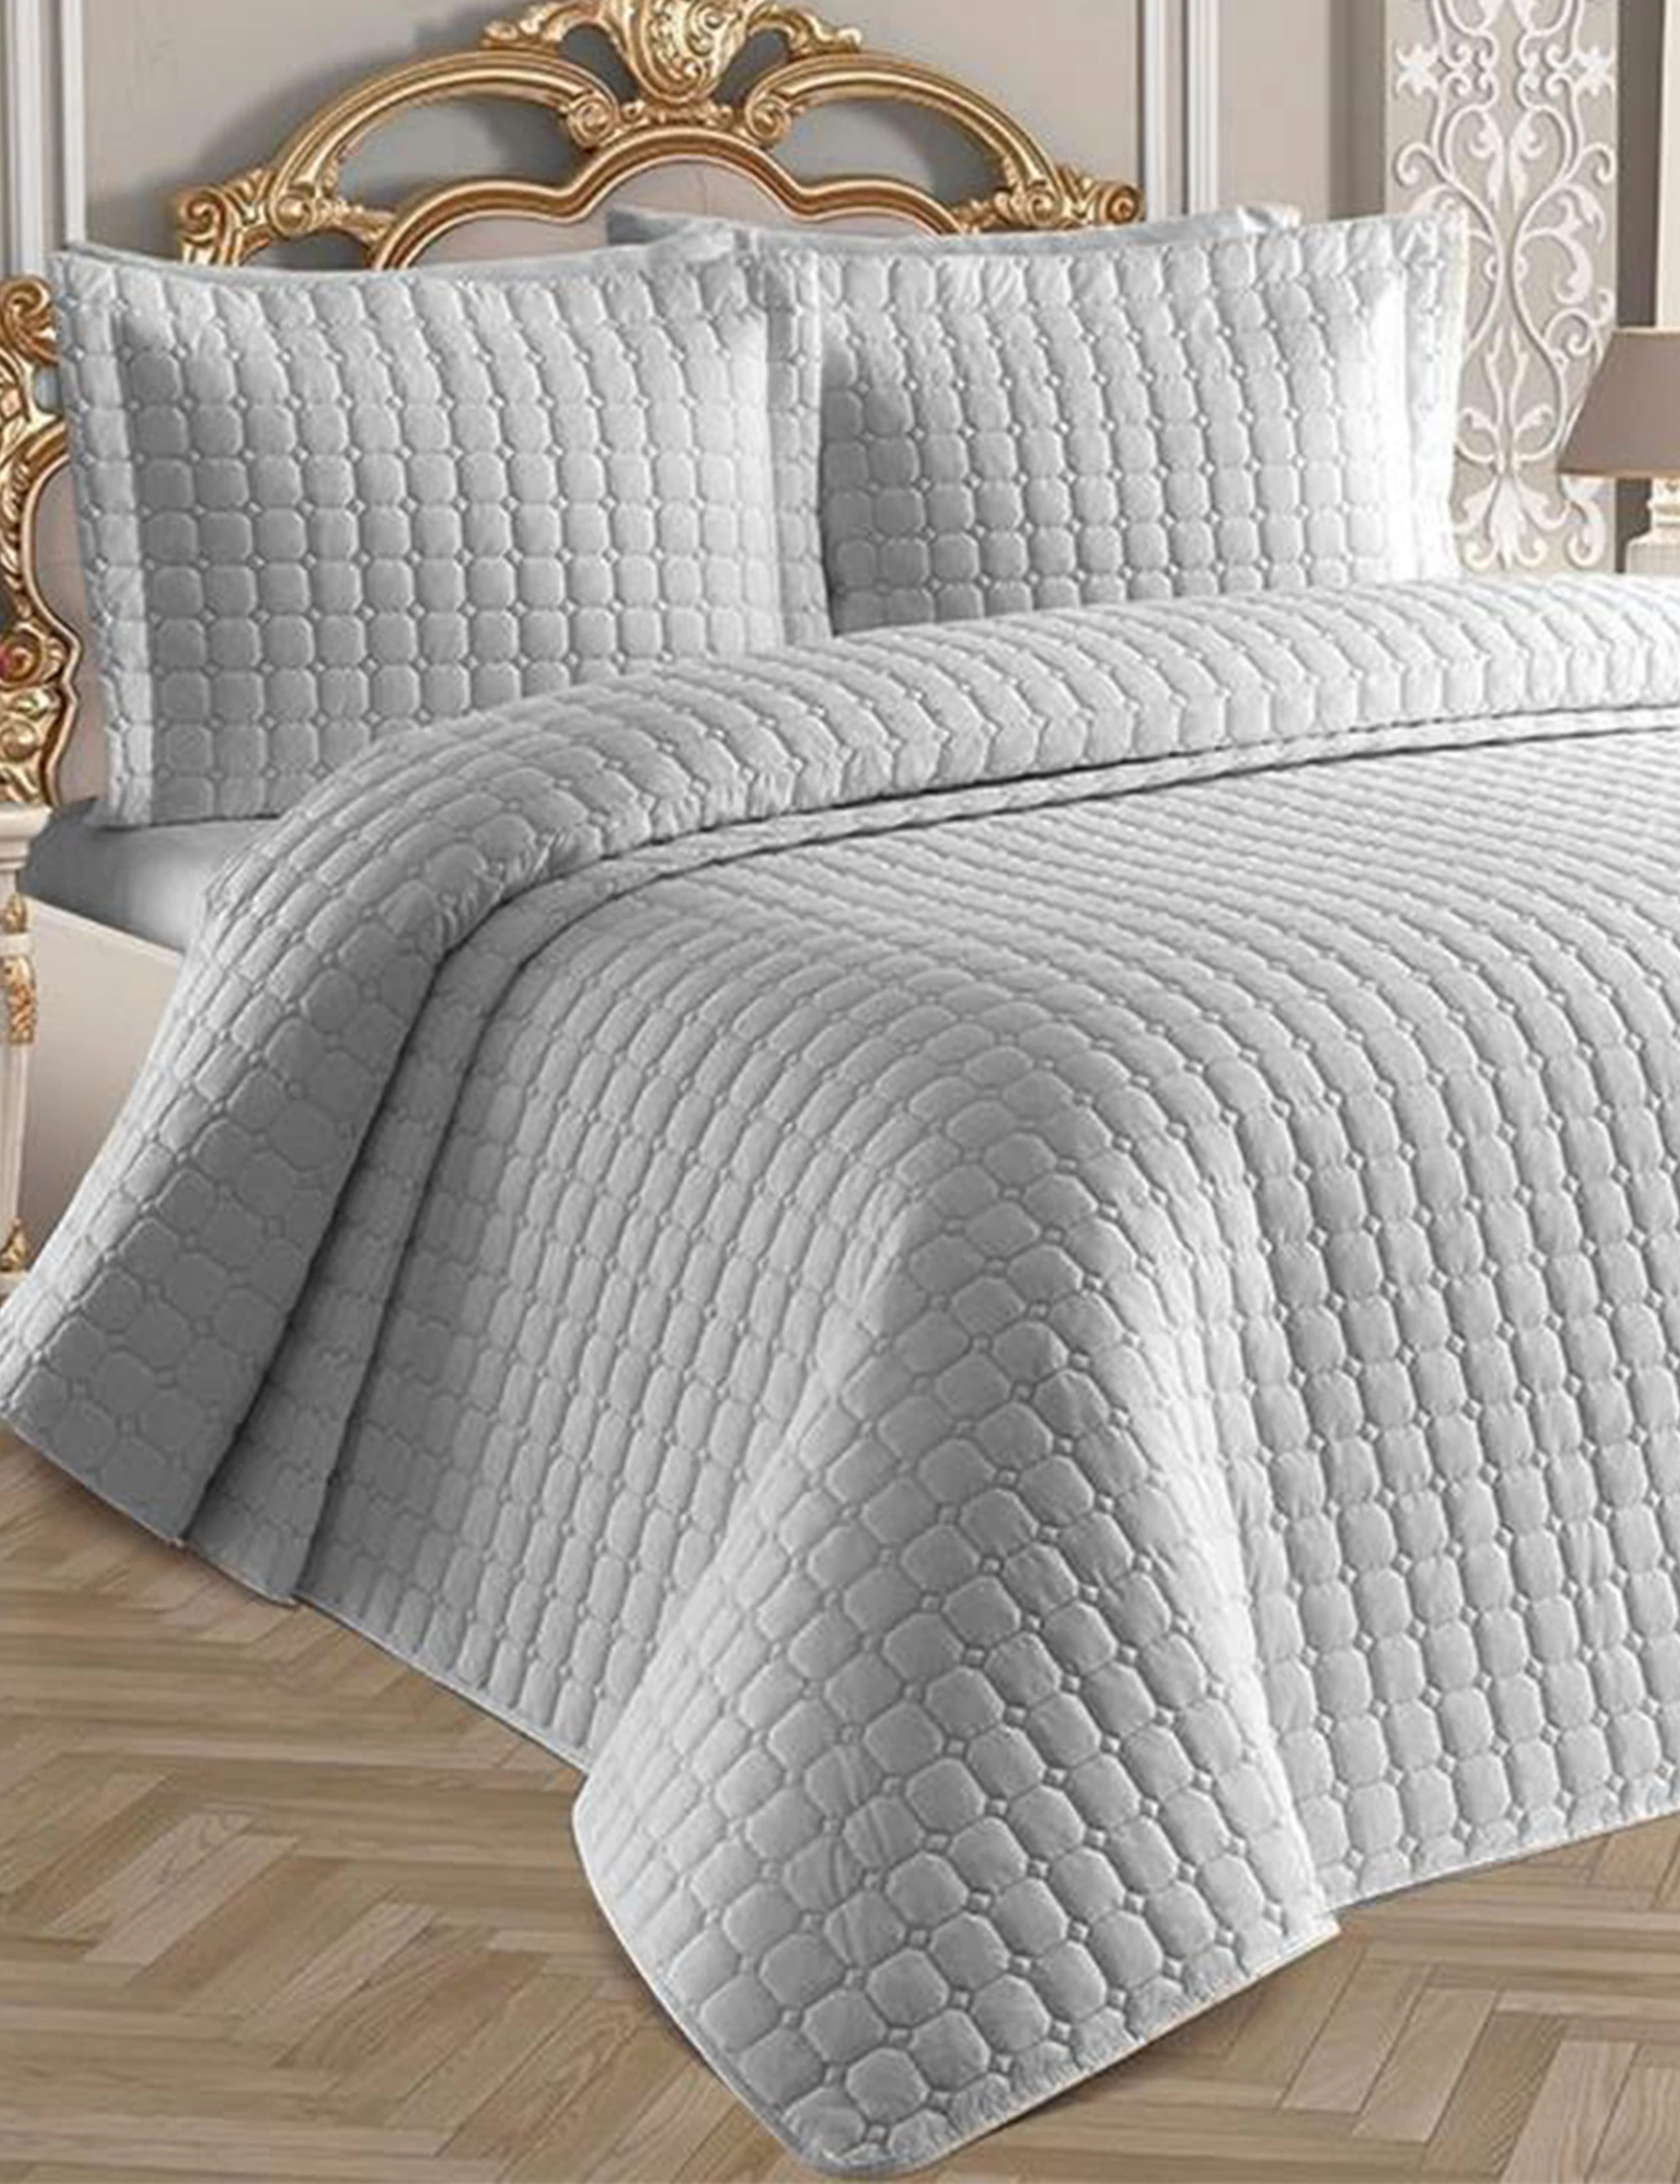 

Estiva New Season Special Edition % 100 Cotton Double Bedspread Set Quilted Filled 250x260 cm Bed Cover 1pc Pillowcases 2Pc